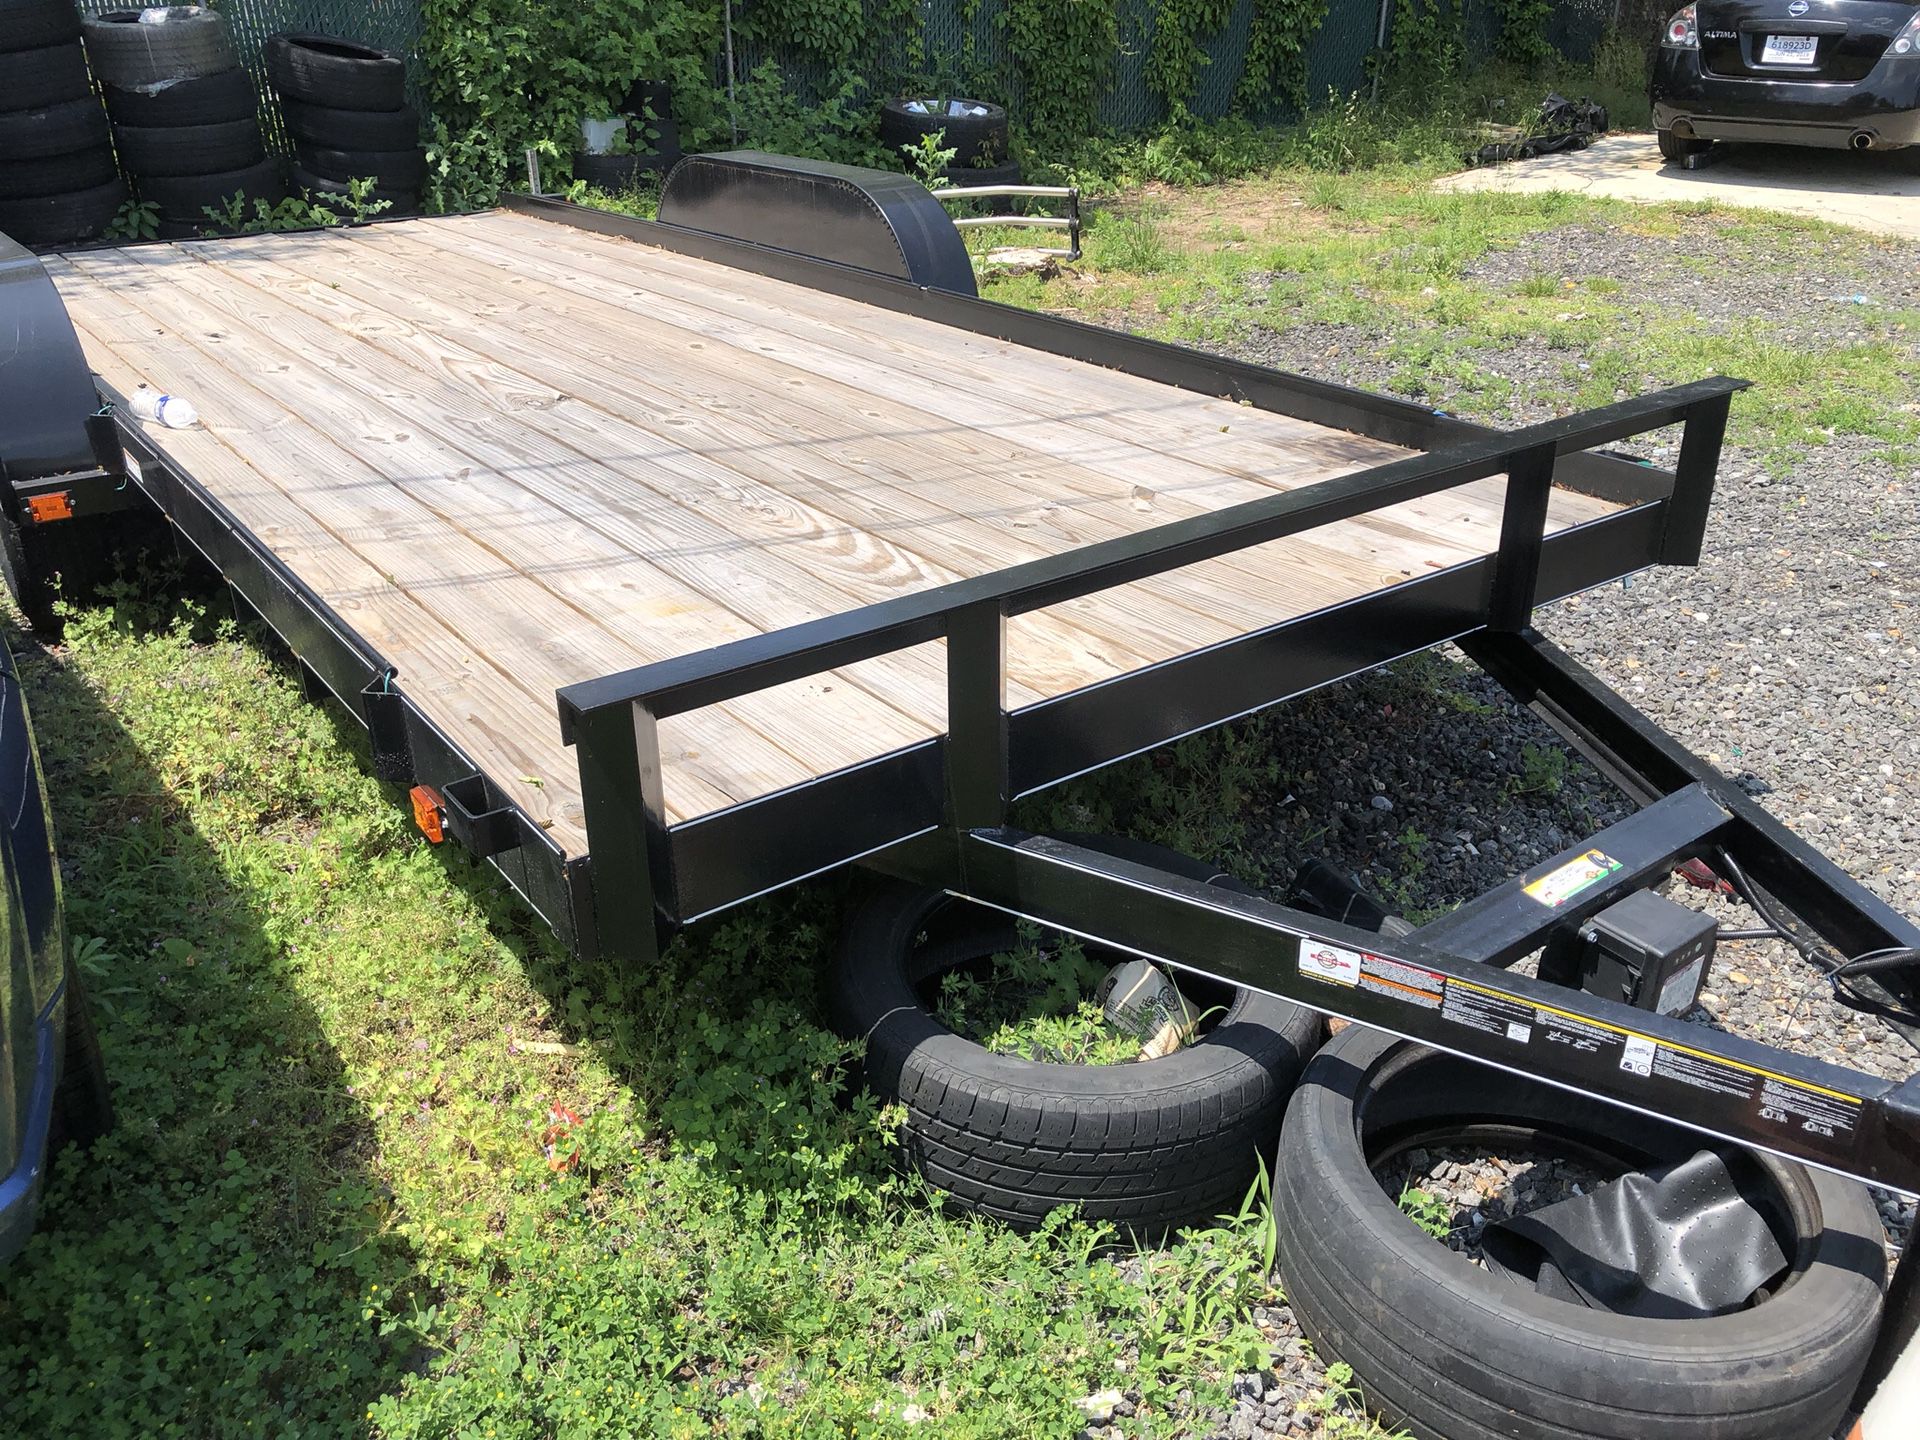 BRAND NEW 2018 one car trailer with NEW wrench